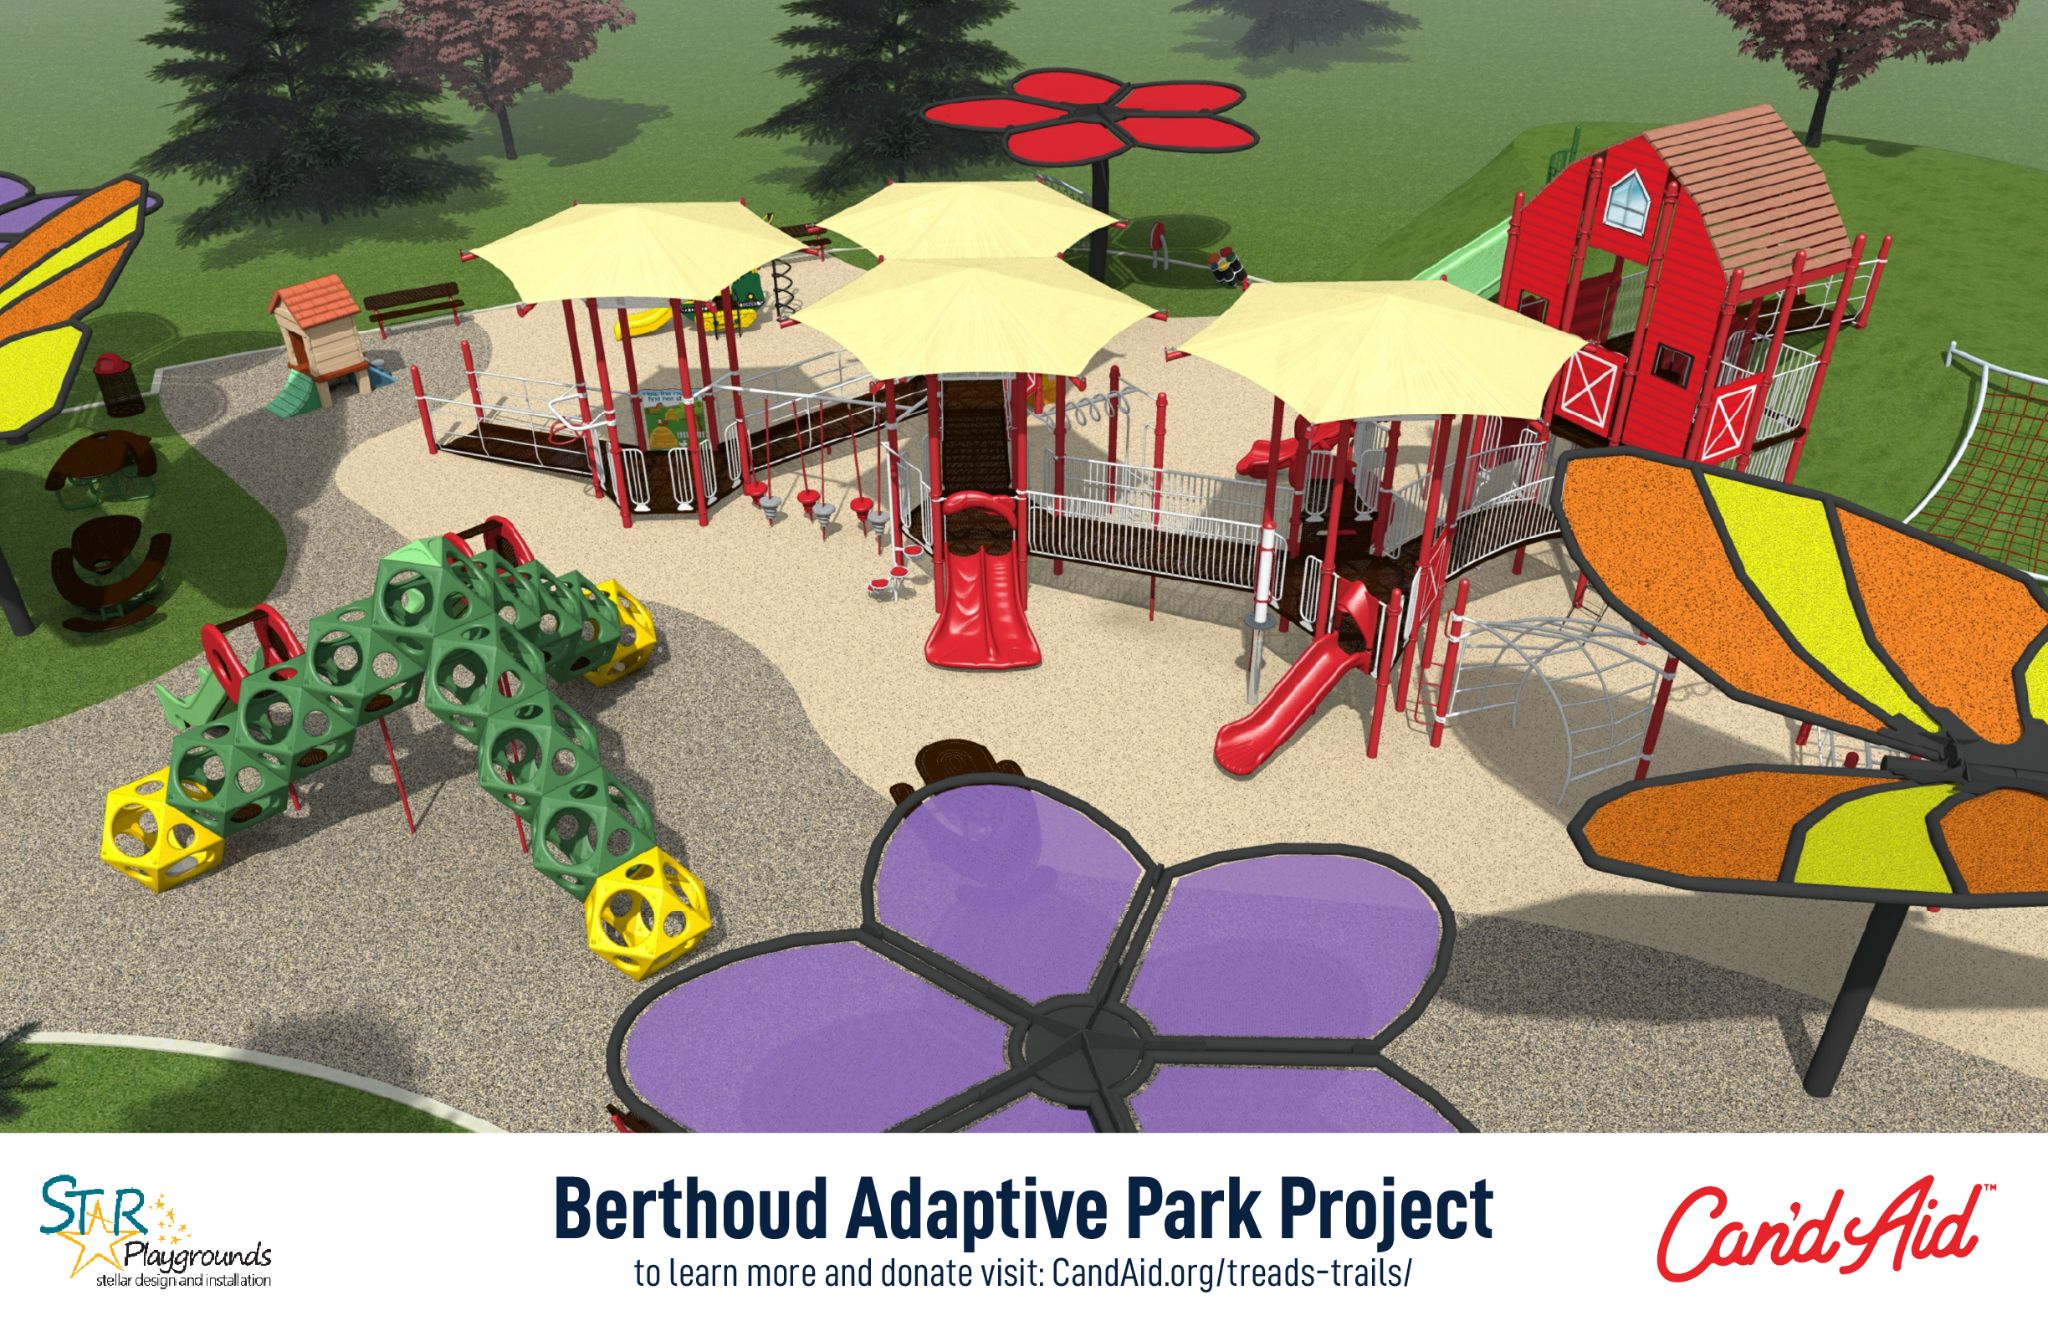 A rendering of an accessible playground